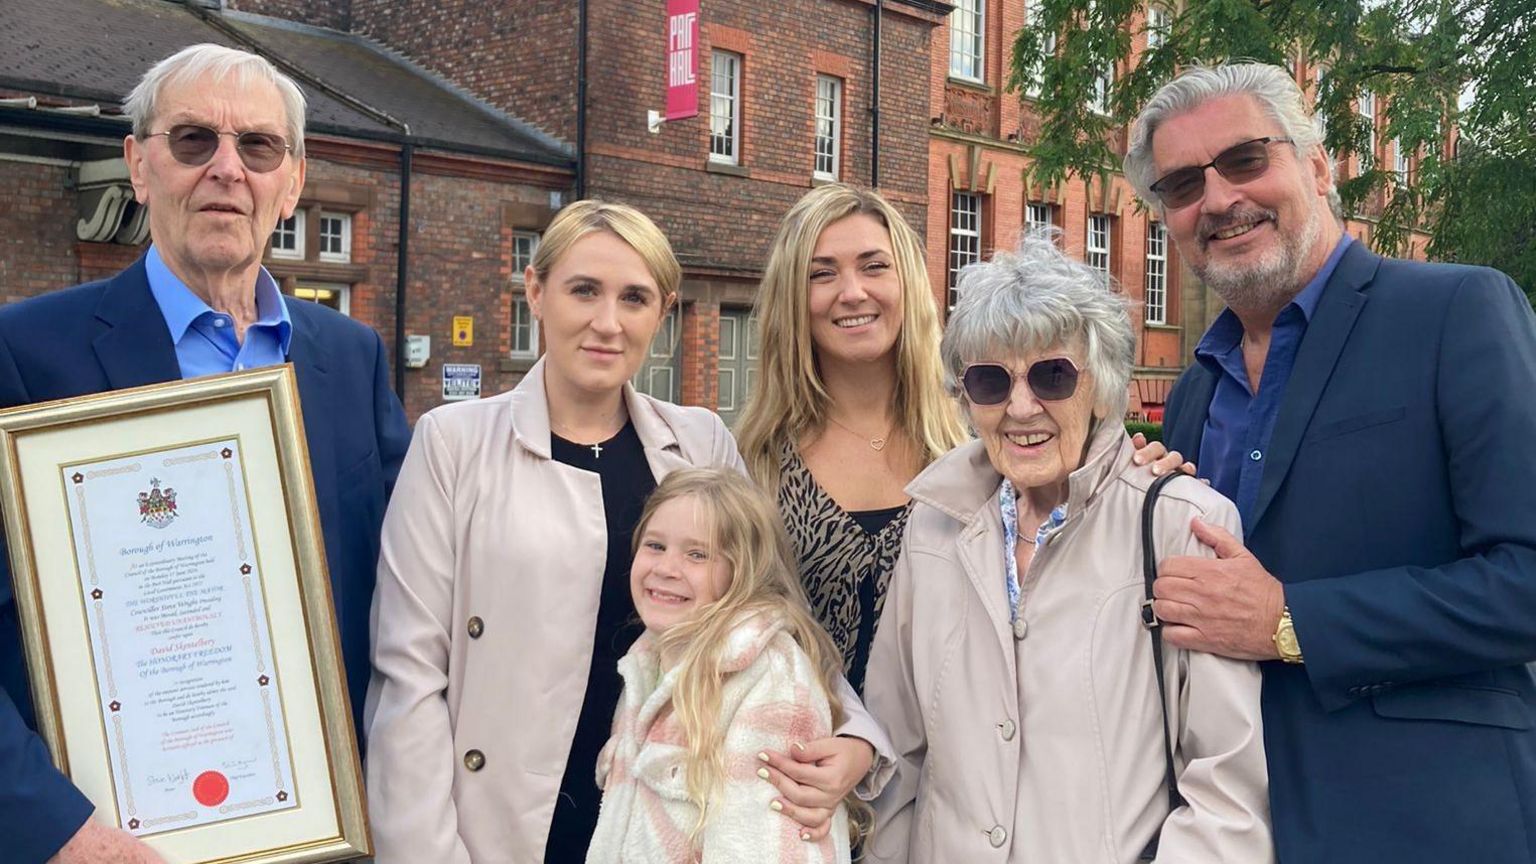 A smiling David Skentelbery and his son Gary pose with David's grey-haired wife Patricia, who wears dark glasses and wears a buff-coloured coat, and his two blond-haired granddaughters and blond-haired great-granddaughter